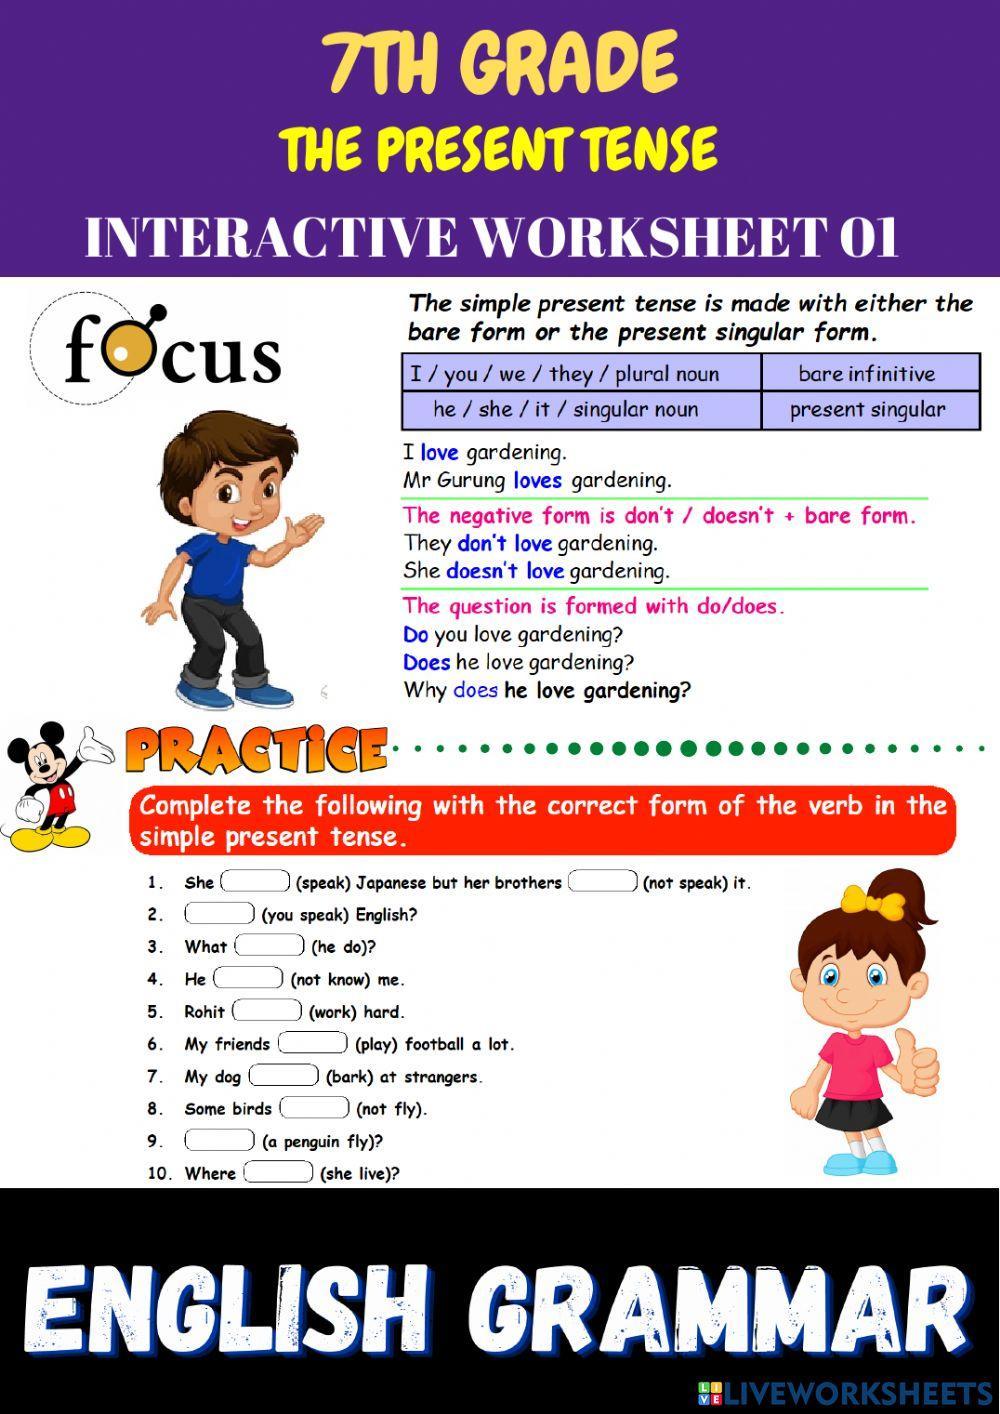 7th- eng - ps 01 - the present tense